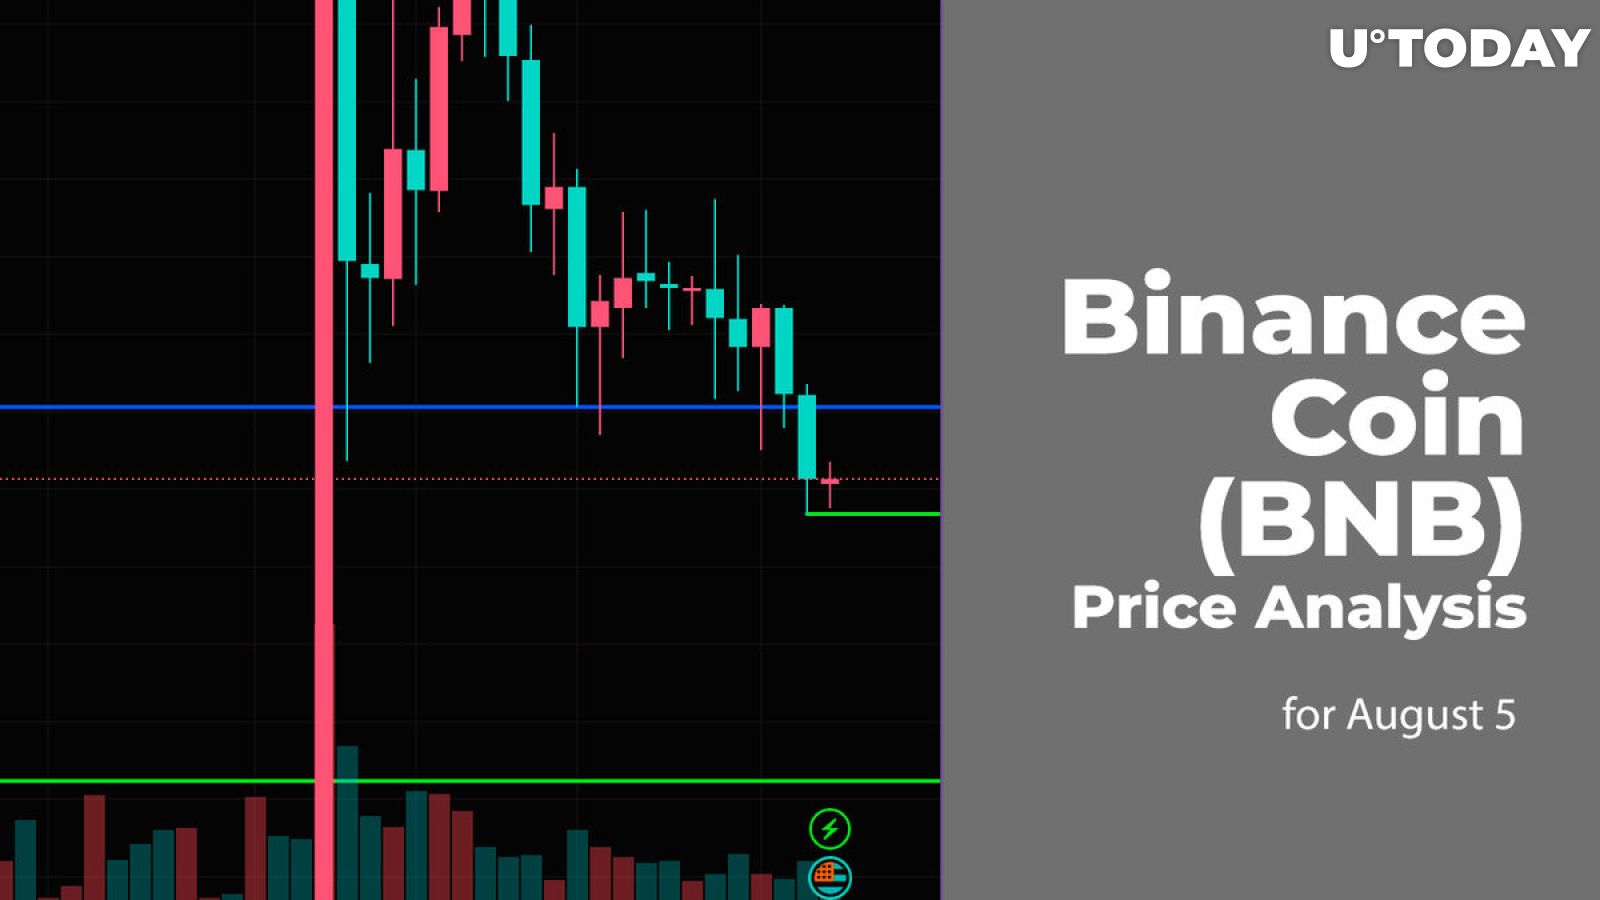 Binance Coin (BNB) Price Analysis for August 5